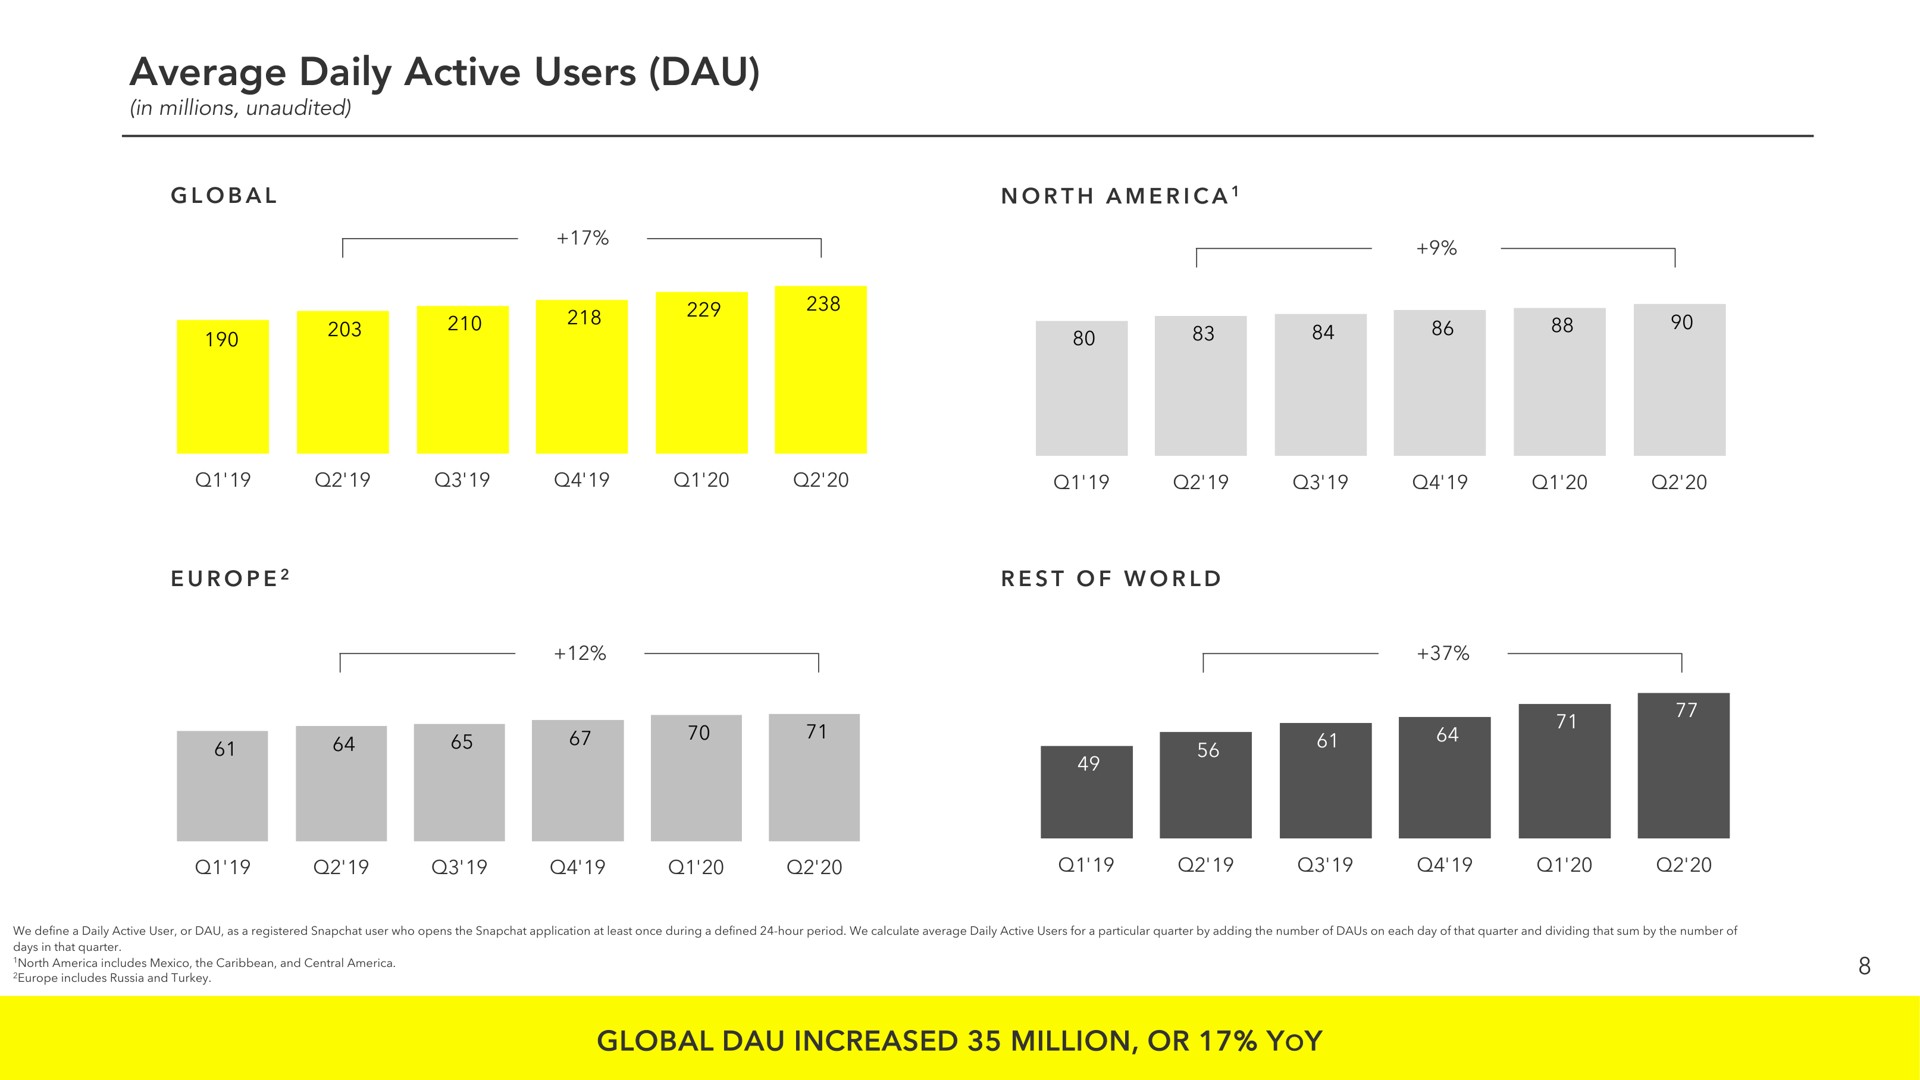 average daily active users global increased million or yoy | Snap Inc